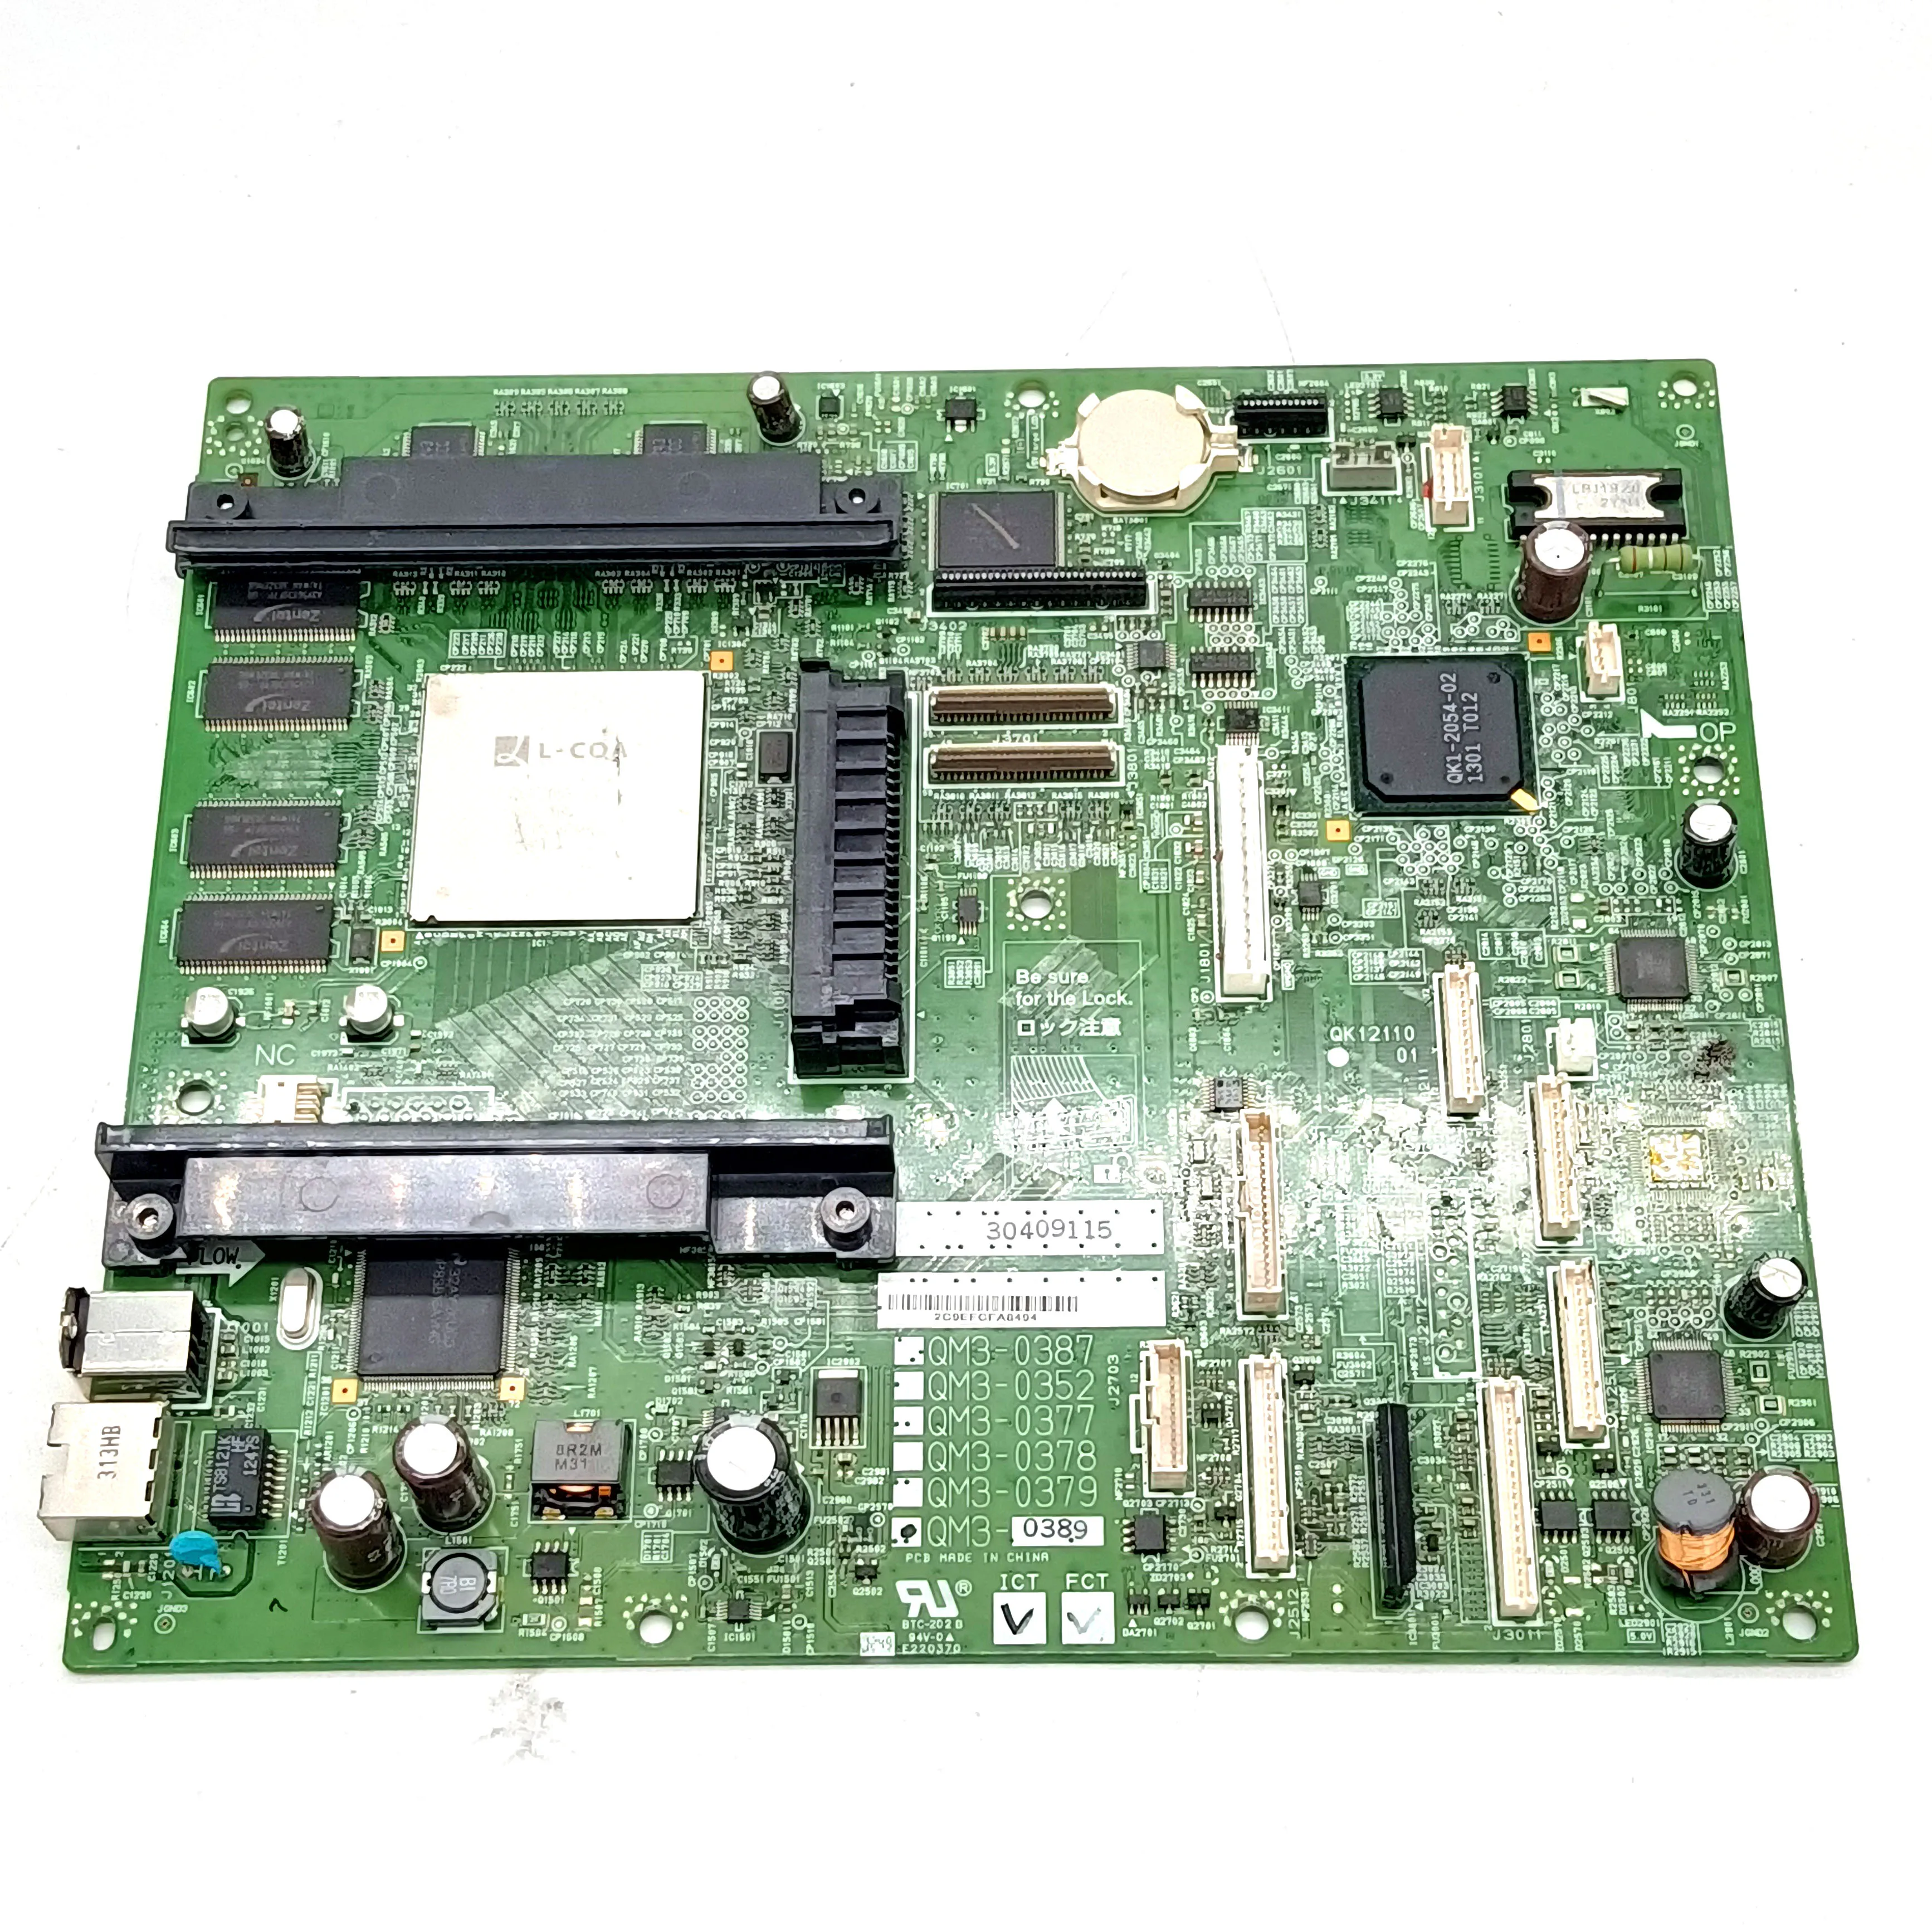 

Main Board Motherboard QM3-0389 Fits For Canon iPF605 iPF605